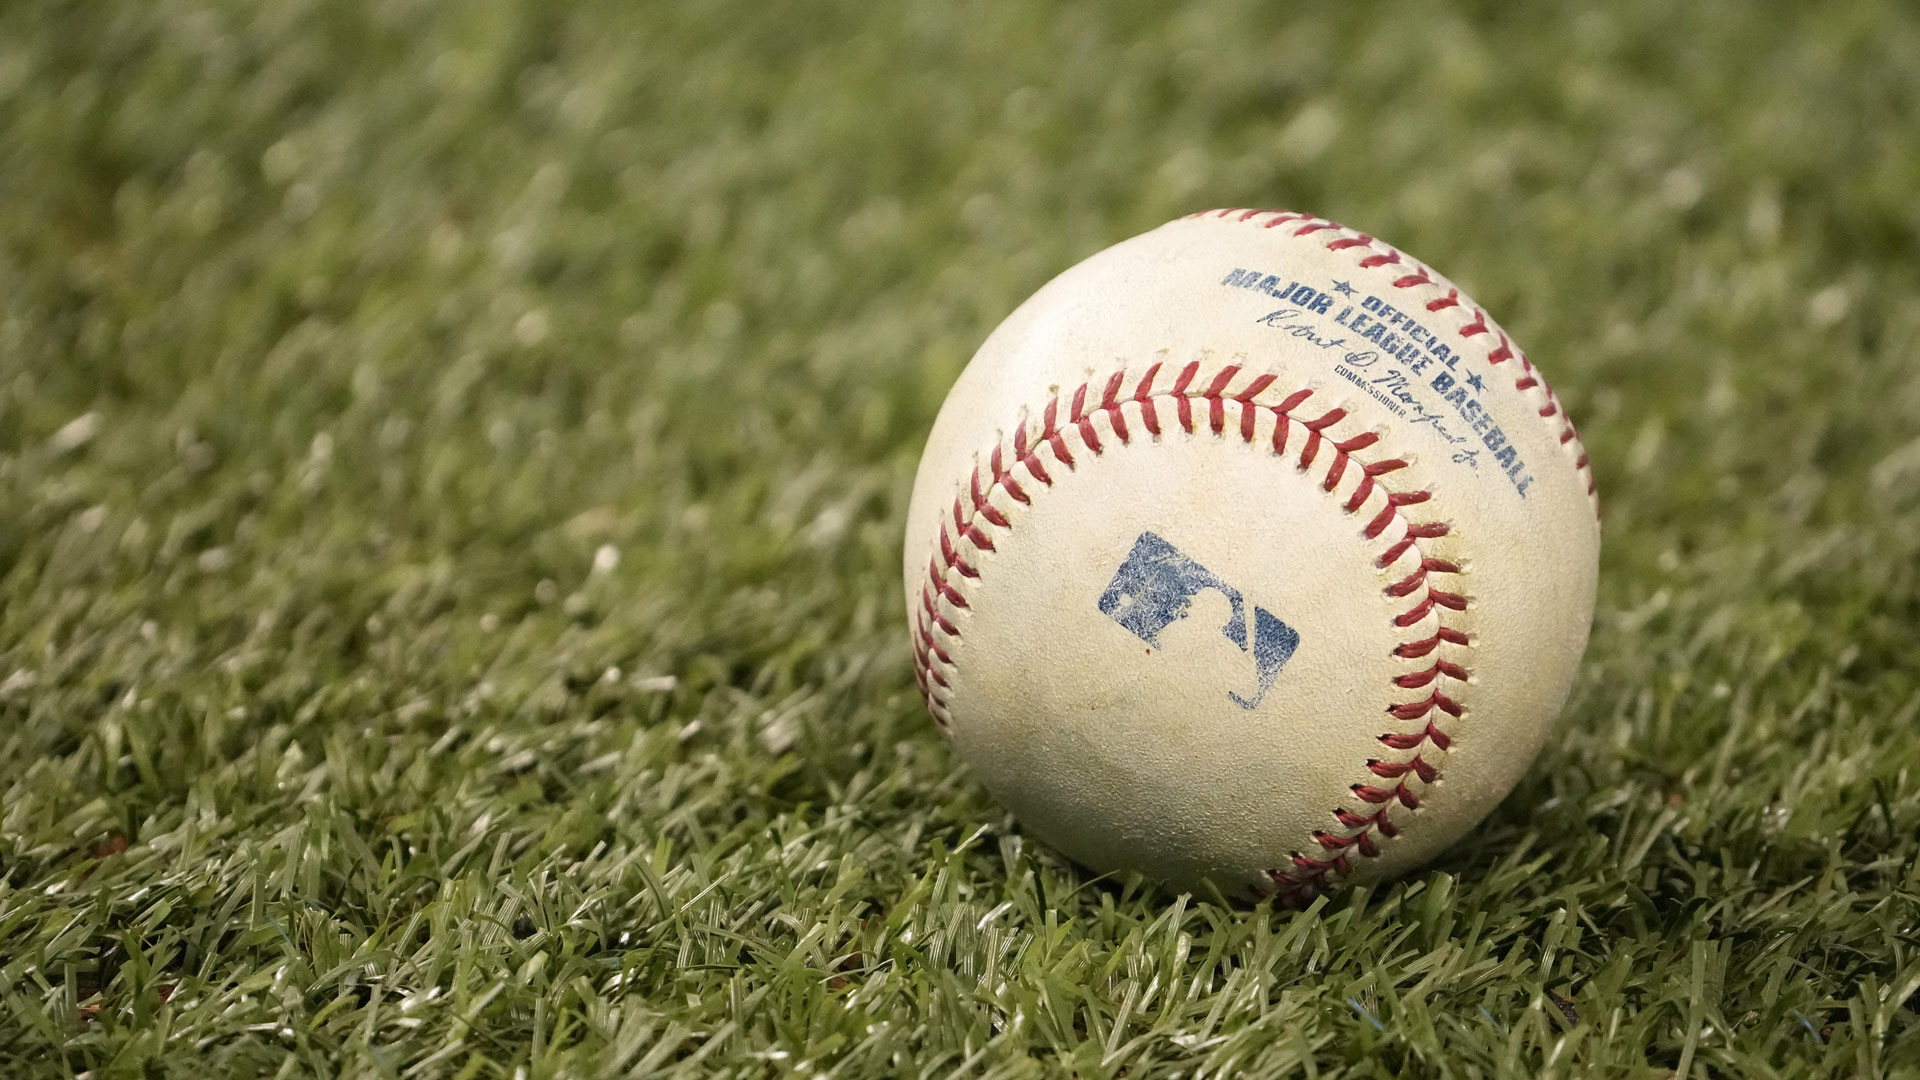 MLB Official Baseball Rules, Annotated: Equipment and Uniforms